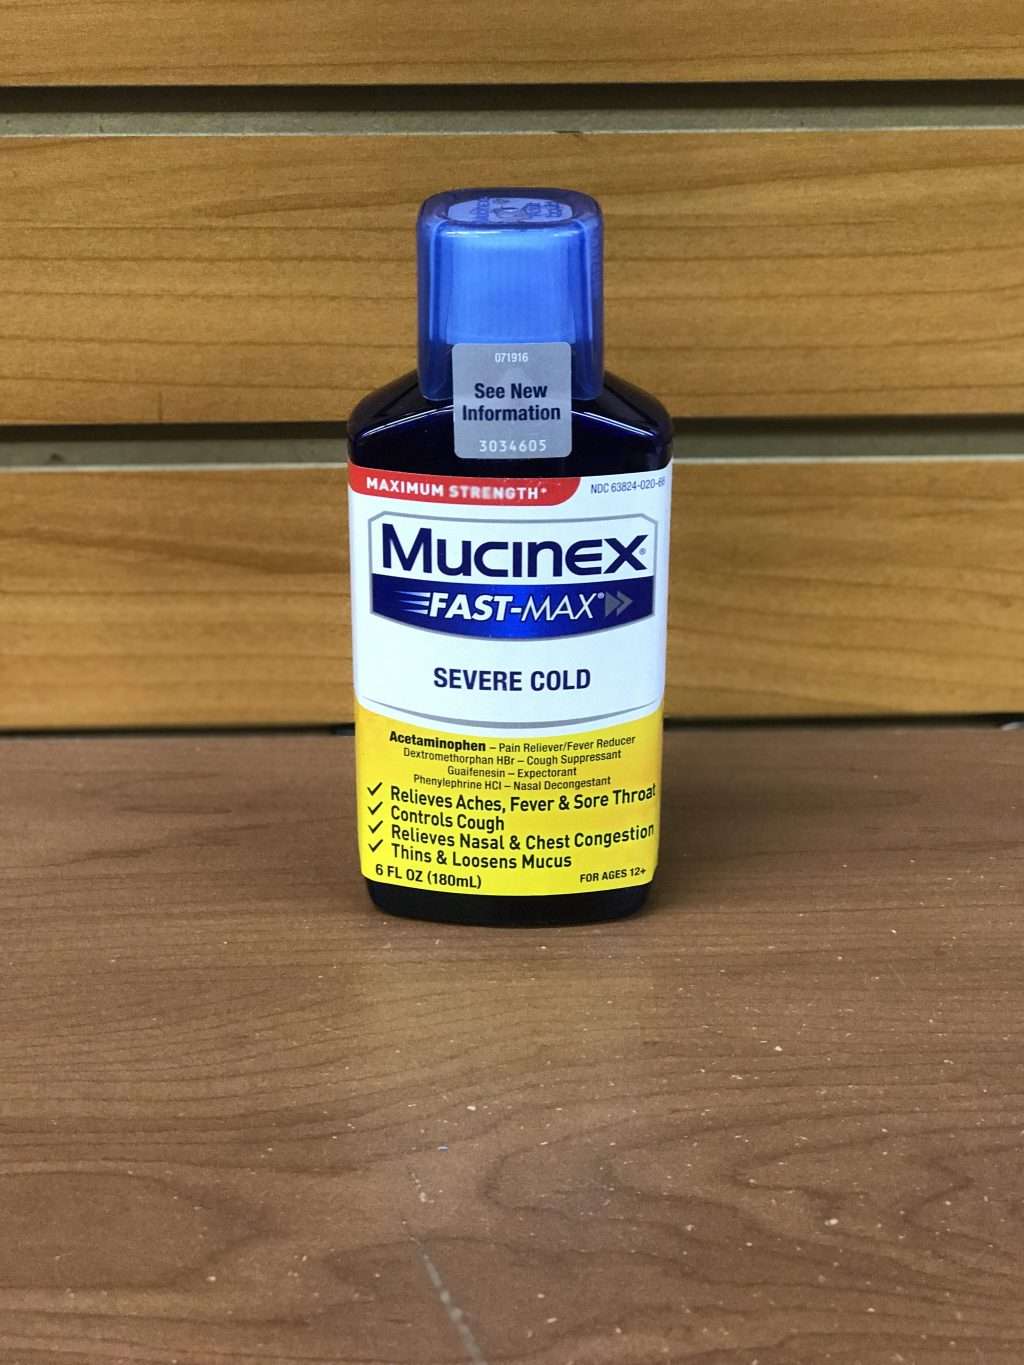 Can I take expired Mucinex products?